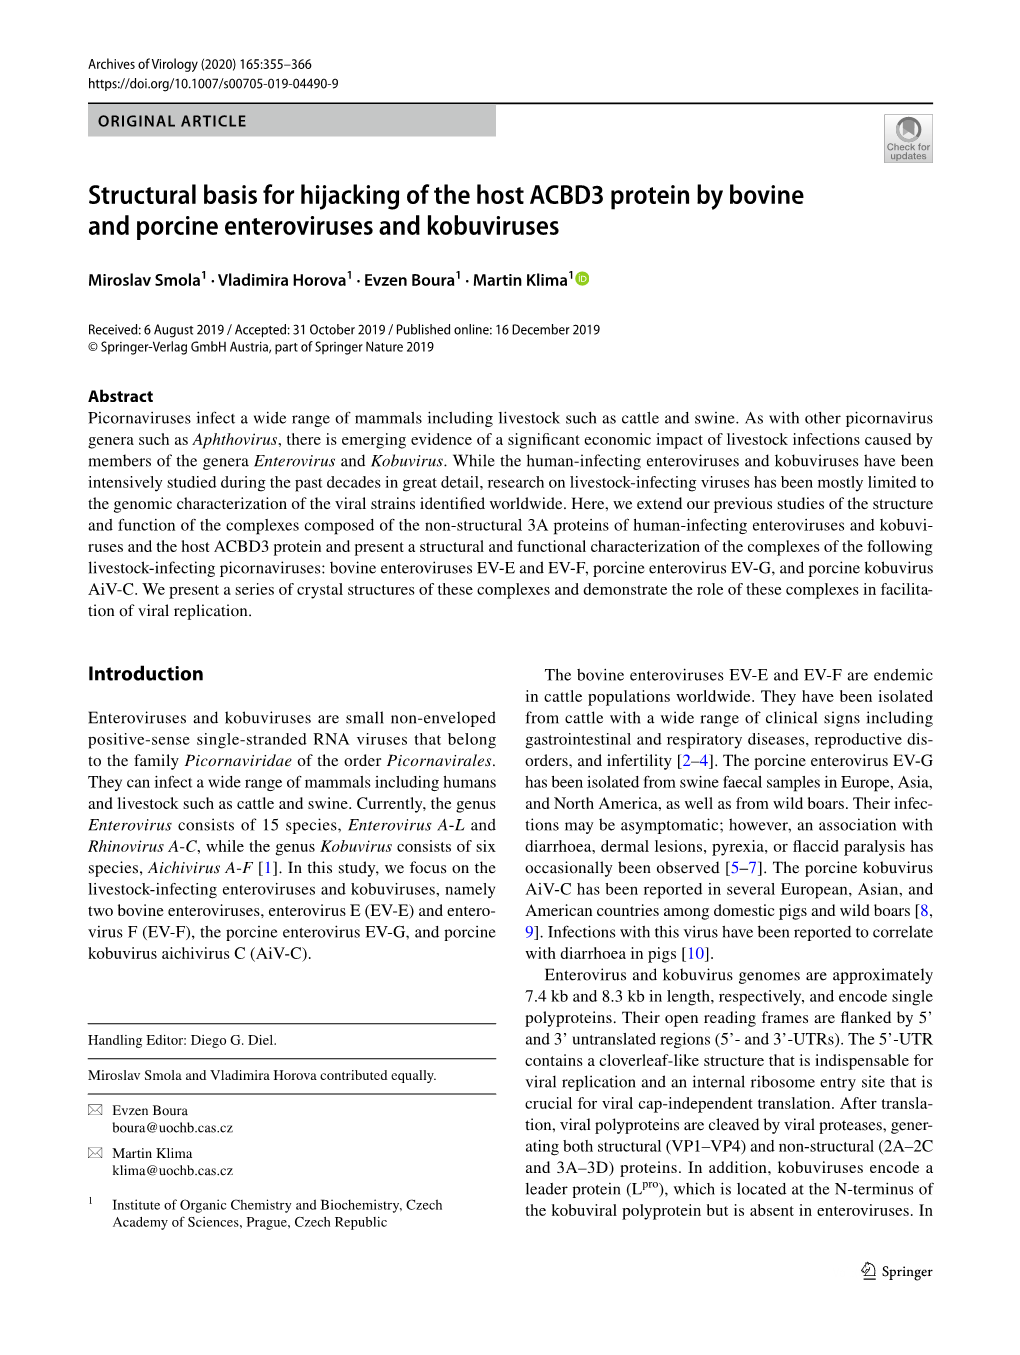 Structural Basis for Hijacking of the Host ACBD3 Protein by Bovine and Porcine Enteroviruses and Kobuviruses